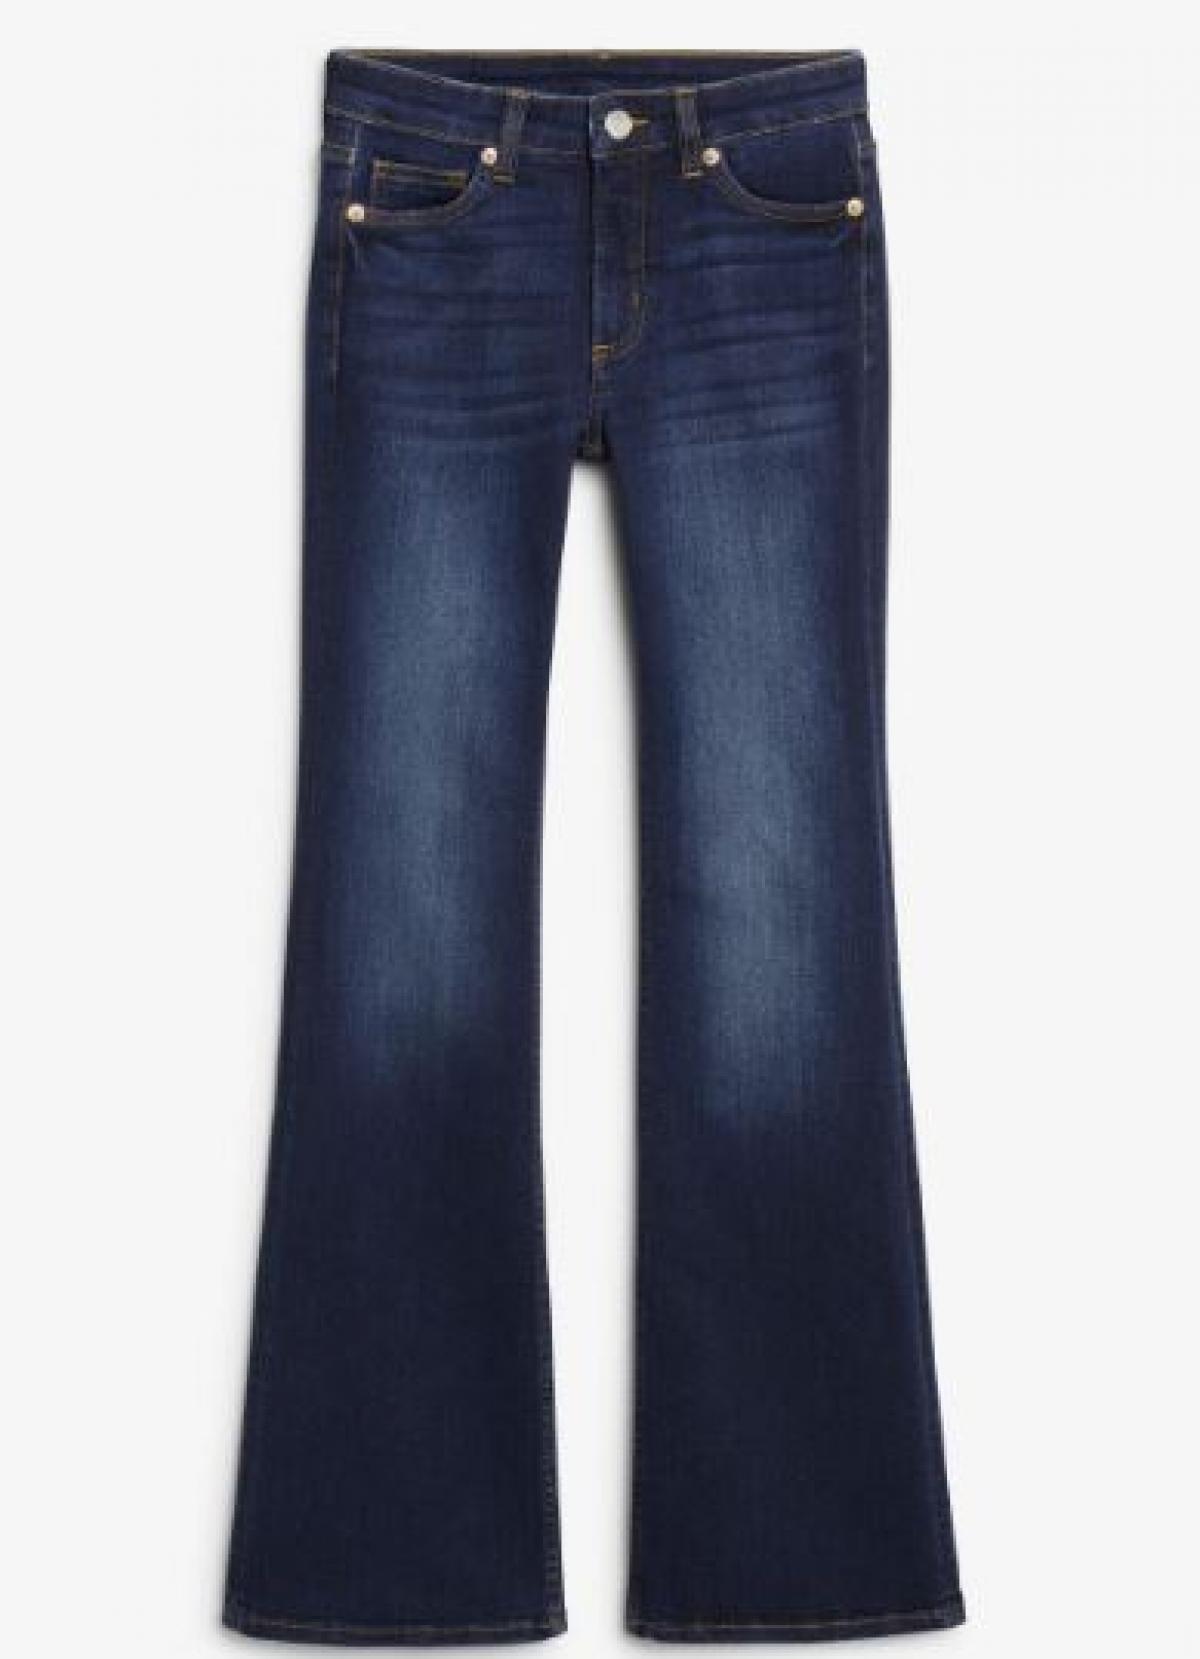 Trend 4: Classic flare jeans